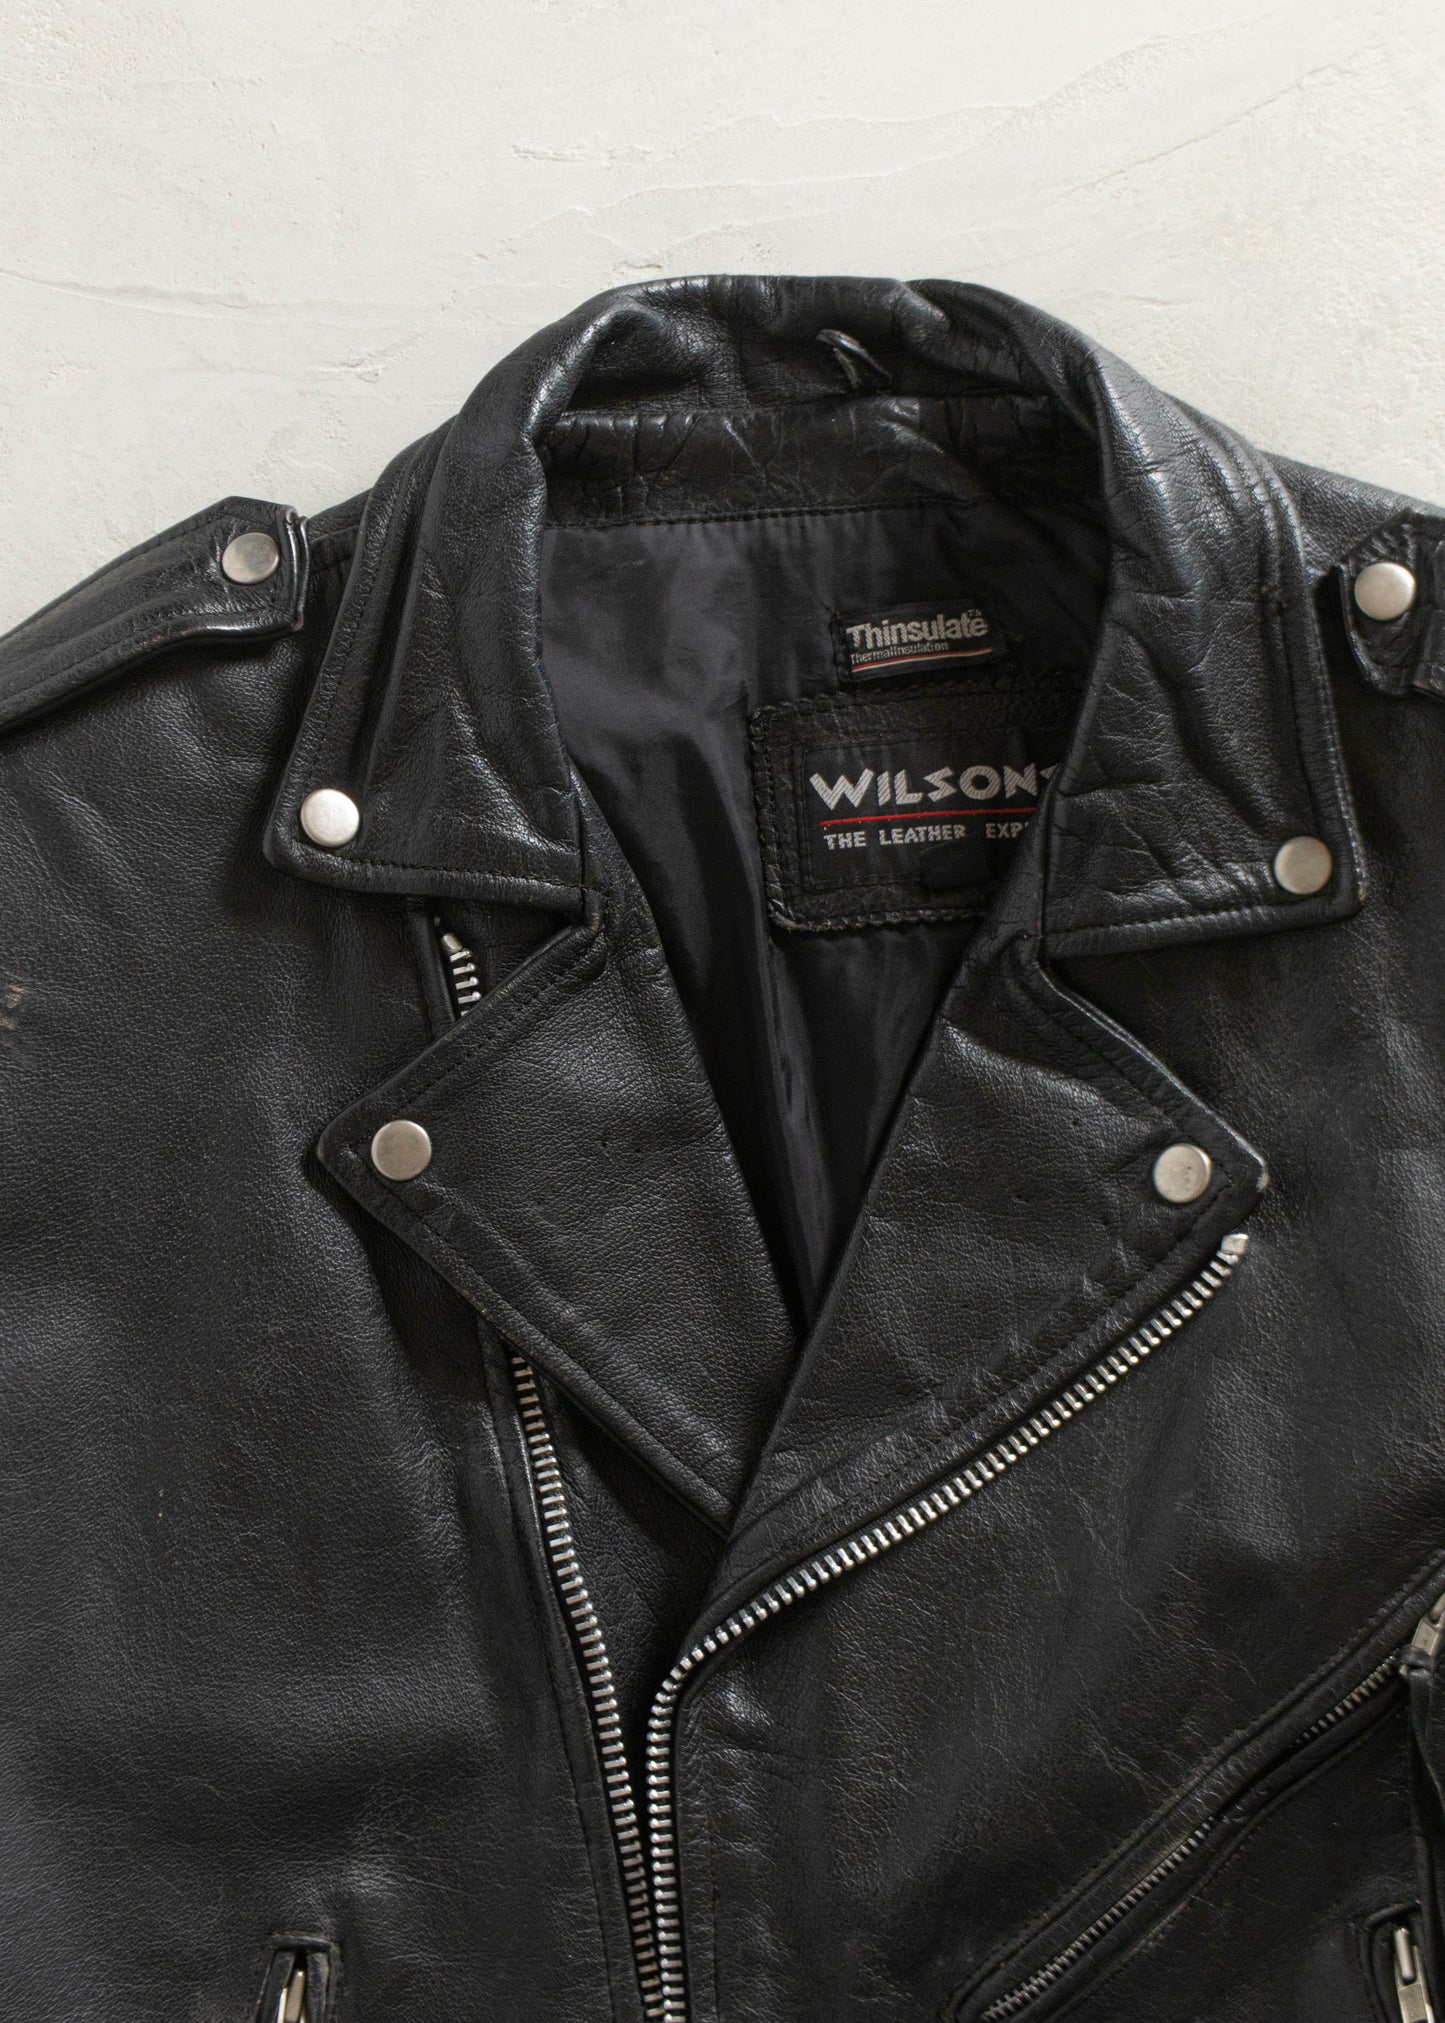 Vintage 1990s Wilsons Motorcycle Leather Jacket Size S/M